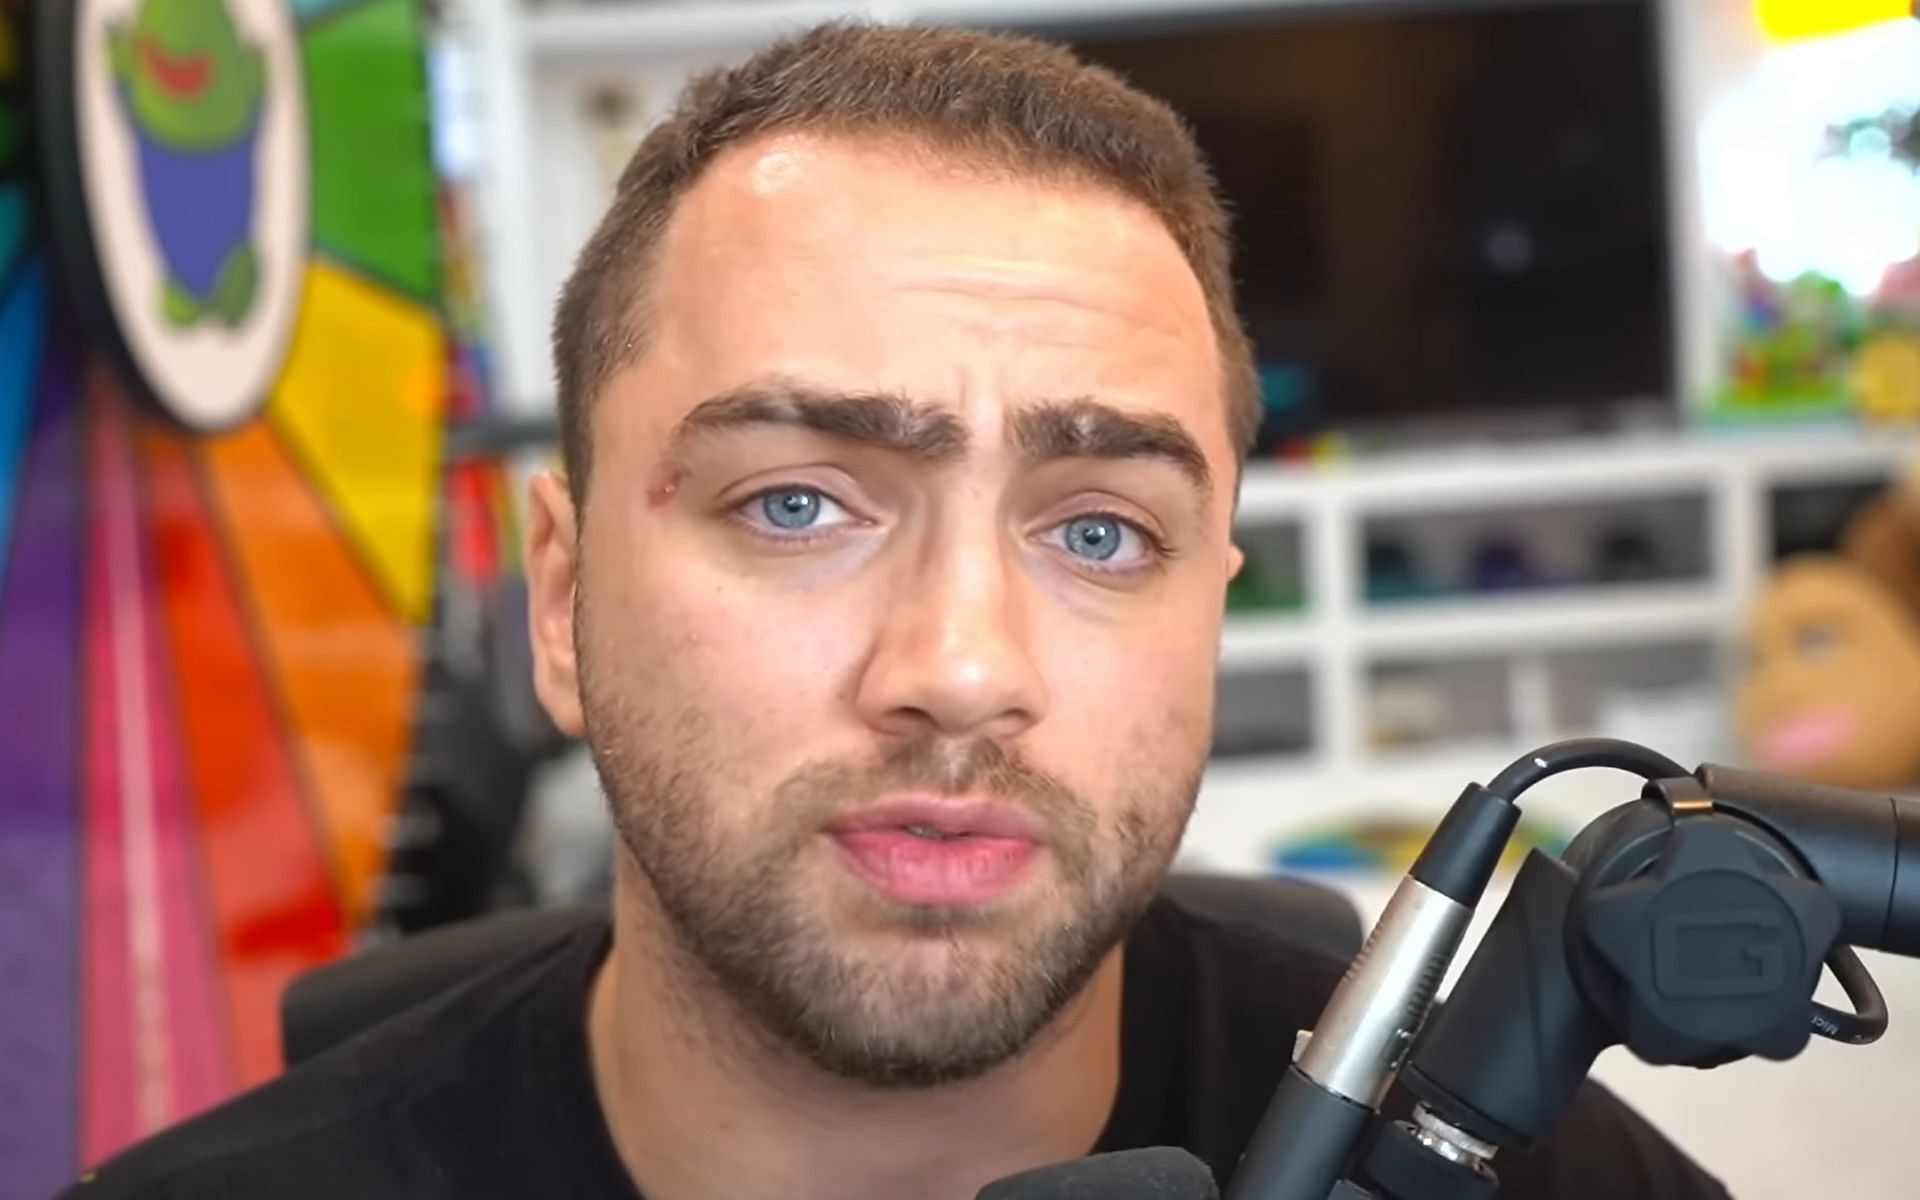 Mizkif reveals that his Discord server with more than 55,000 members was  hacked